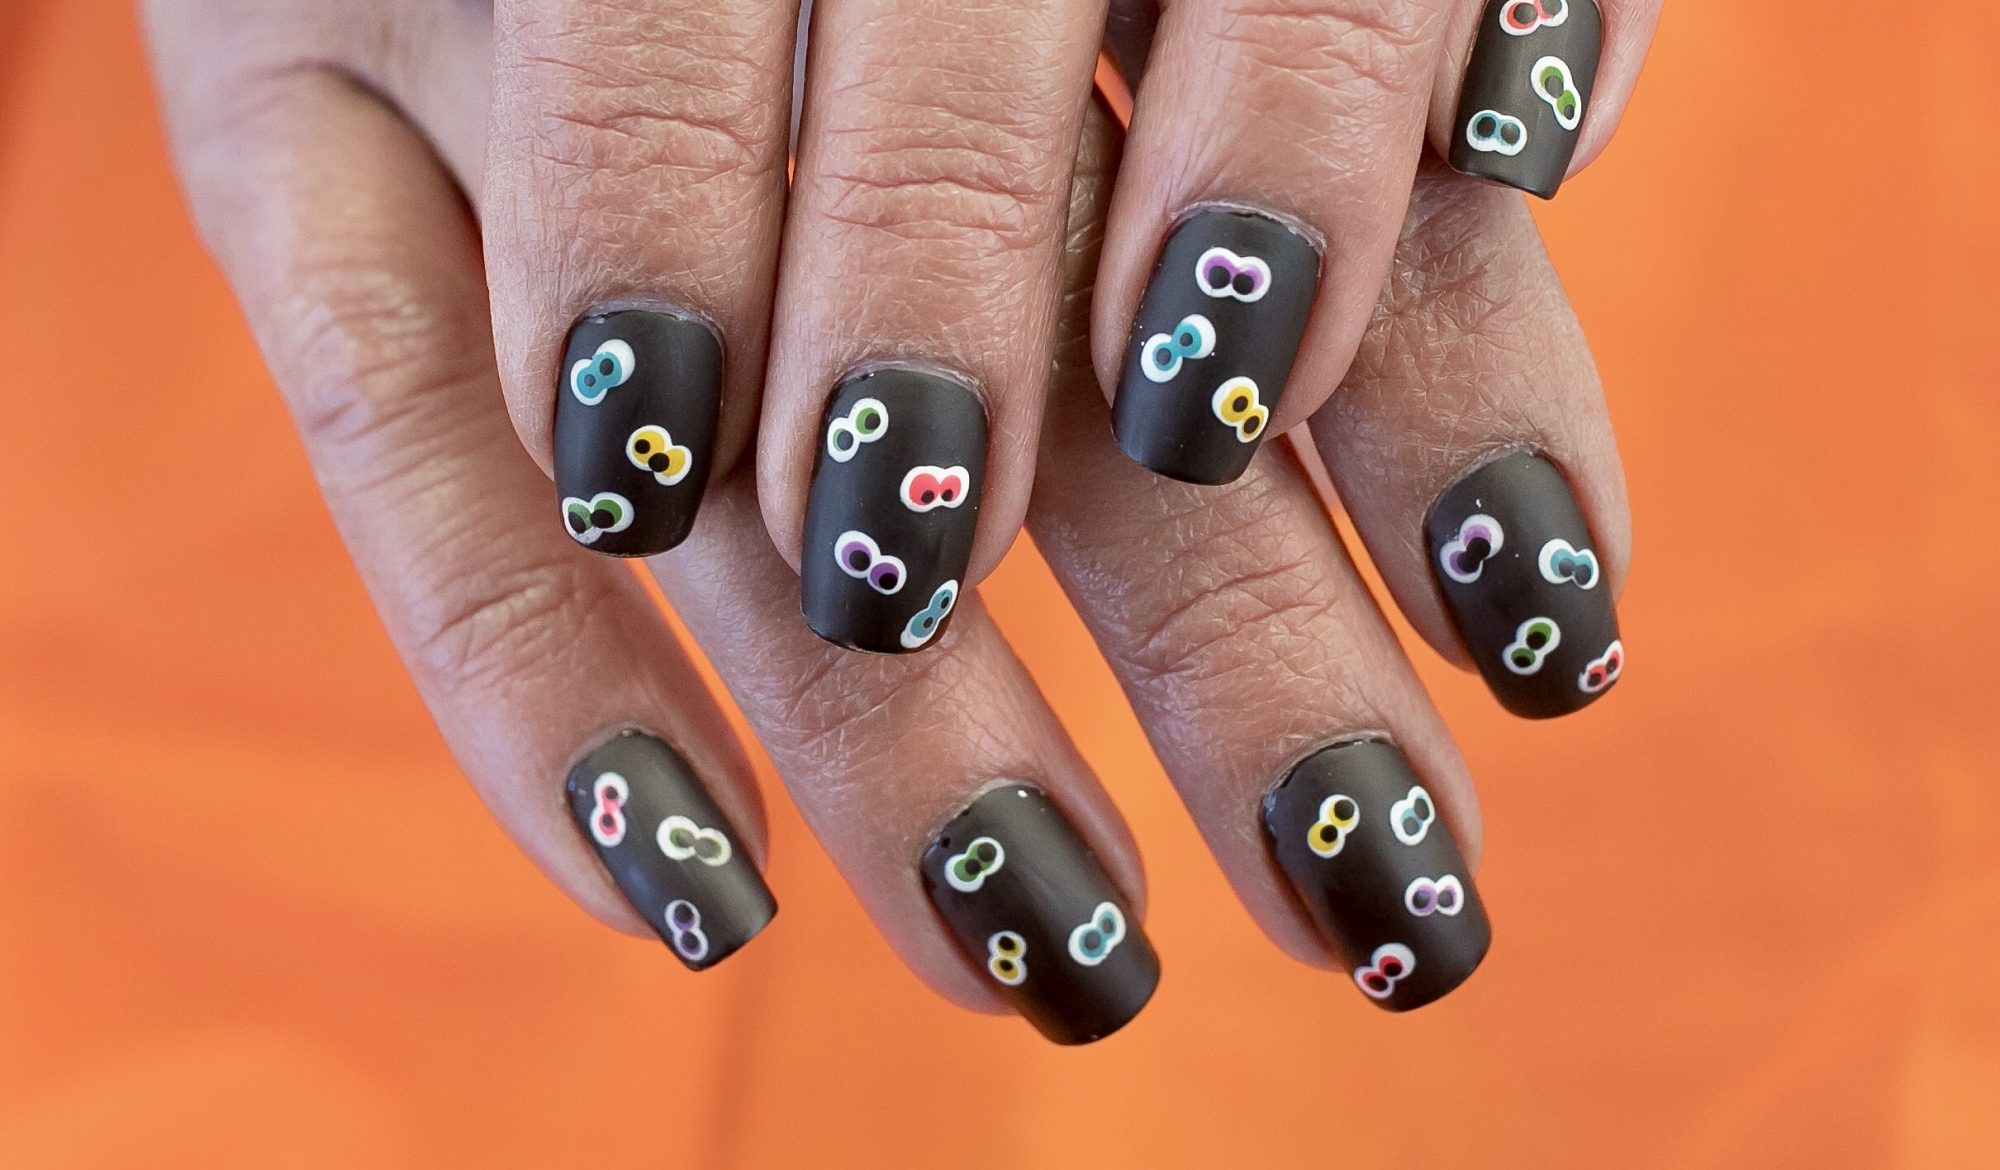 DIY Nail Art techniques 2020: What You Can Do With Nail Dotting